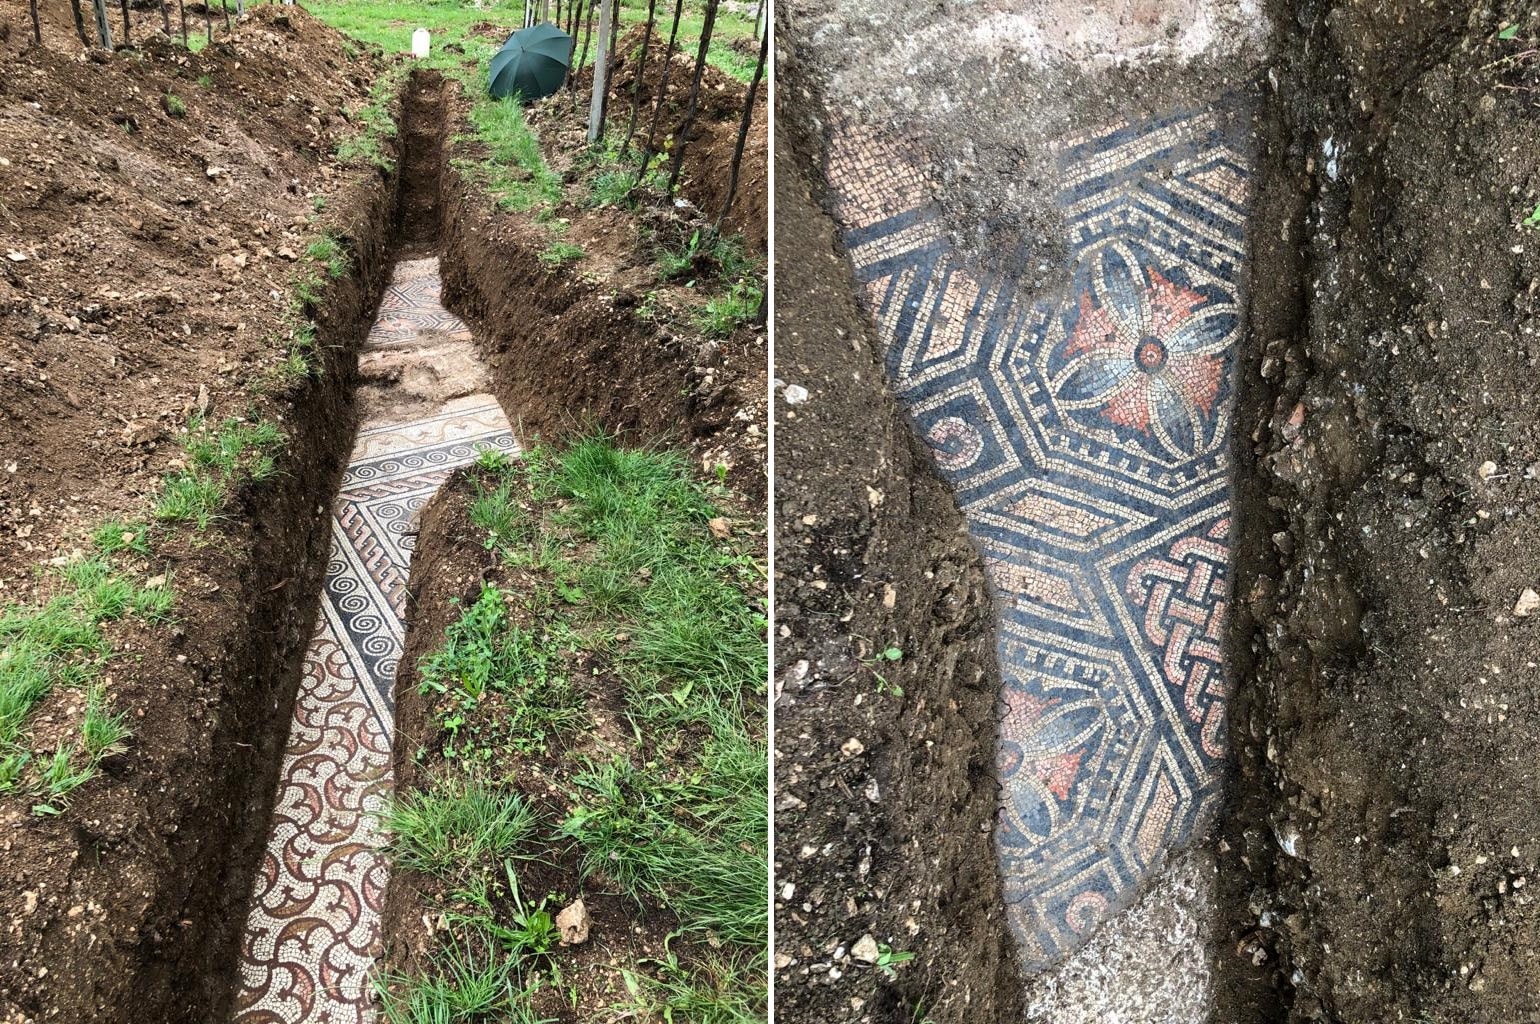  Roman  mosaic floor  has been discovered under a vineyard in 